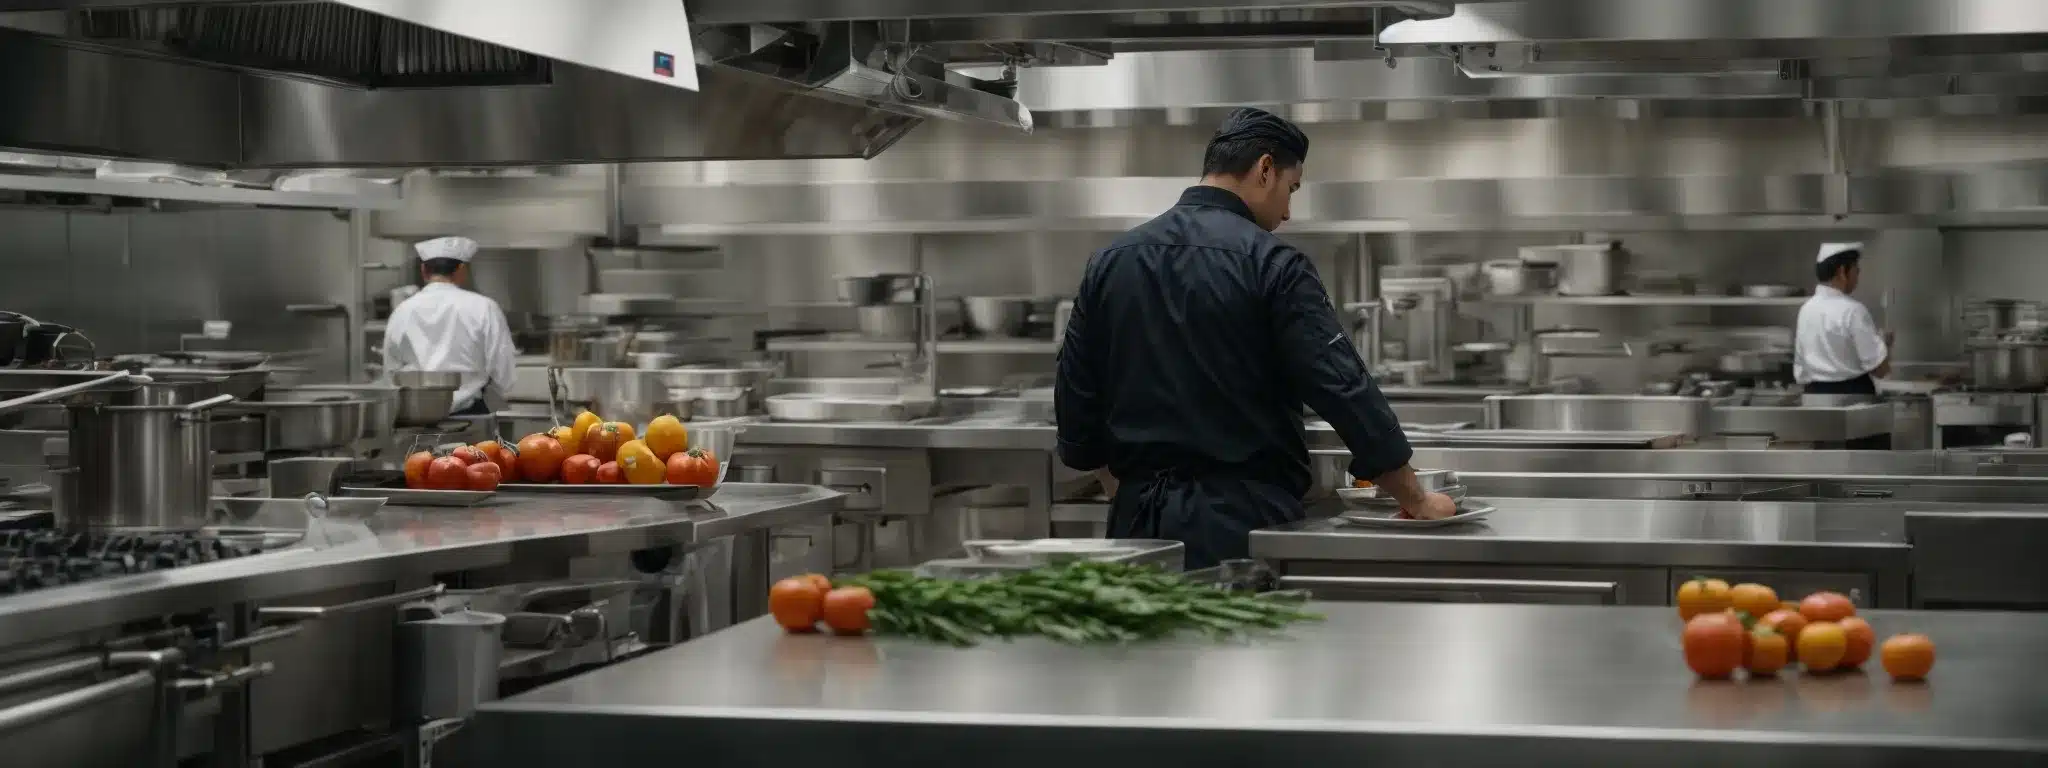 A Chef Surveys A Pristine Commercial Kitchen Filled With Top-Notch Culinary Equipment And Fresh Ingredients Ready For Preparation.